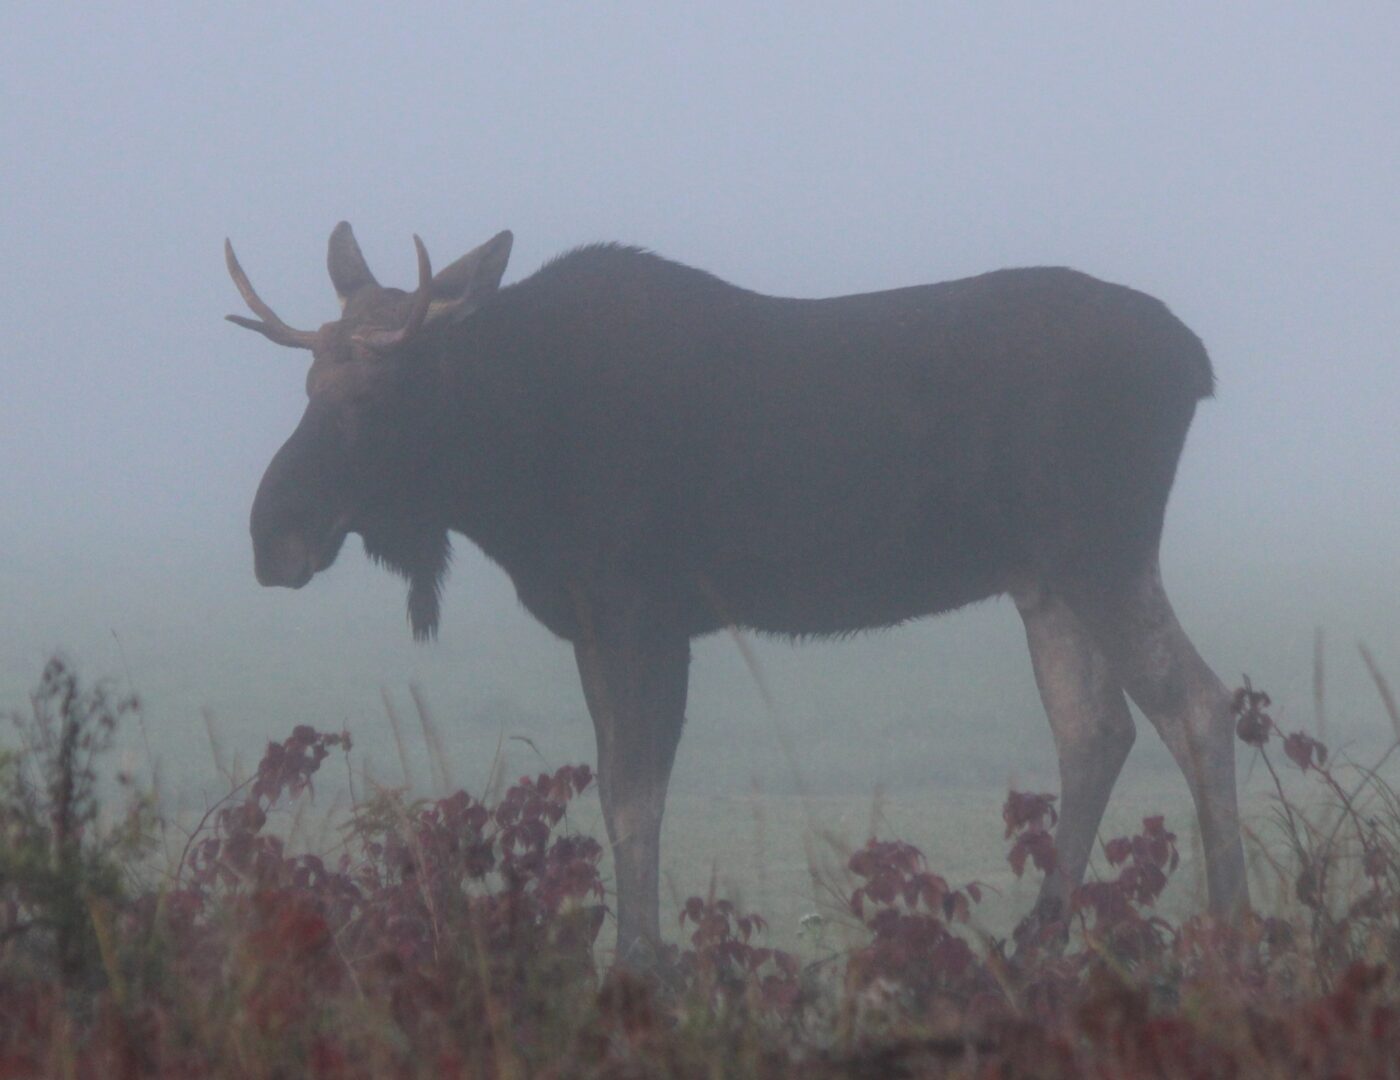 Image of a moose in the mist